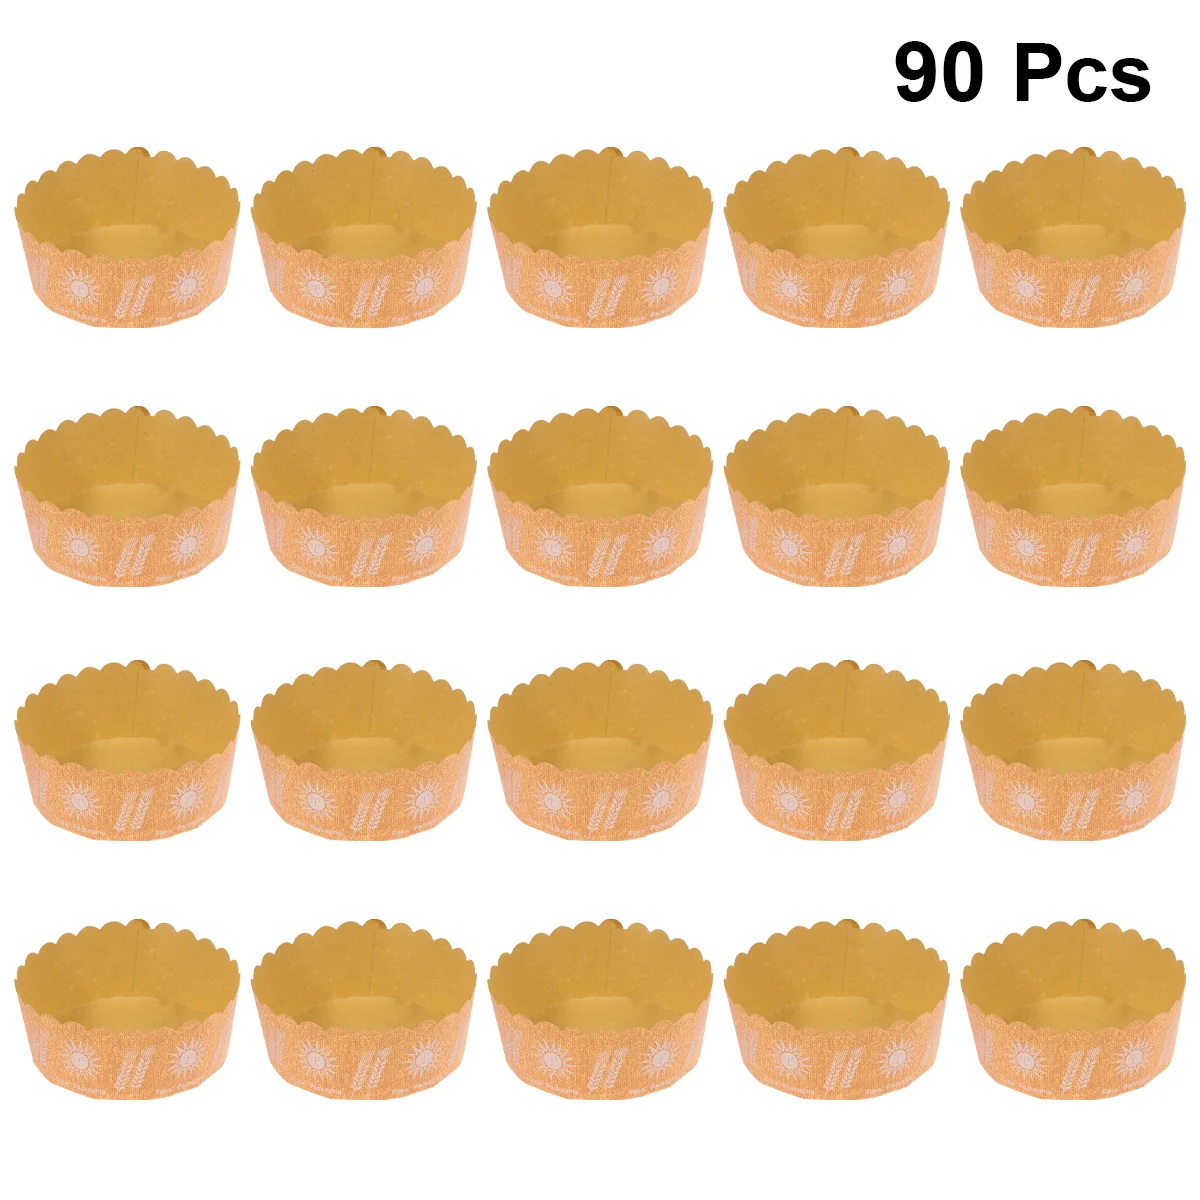 

90PCS 6 Inches Large Kraft Paper Muffin Cups Sunflower Pattern Cupcake Paper Liners Cake Baking Molds